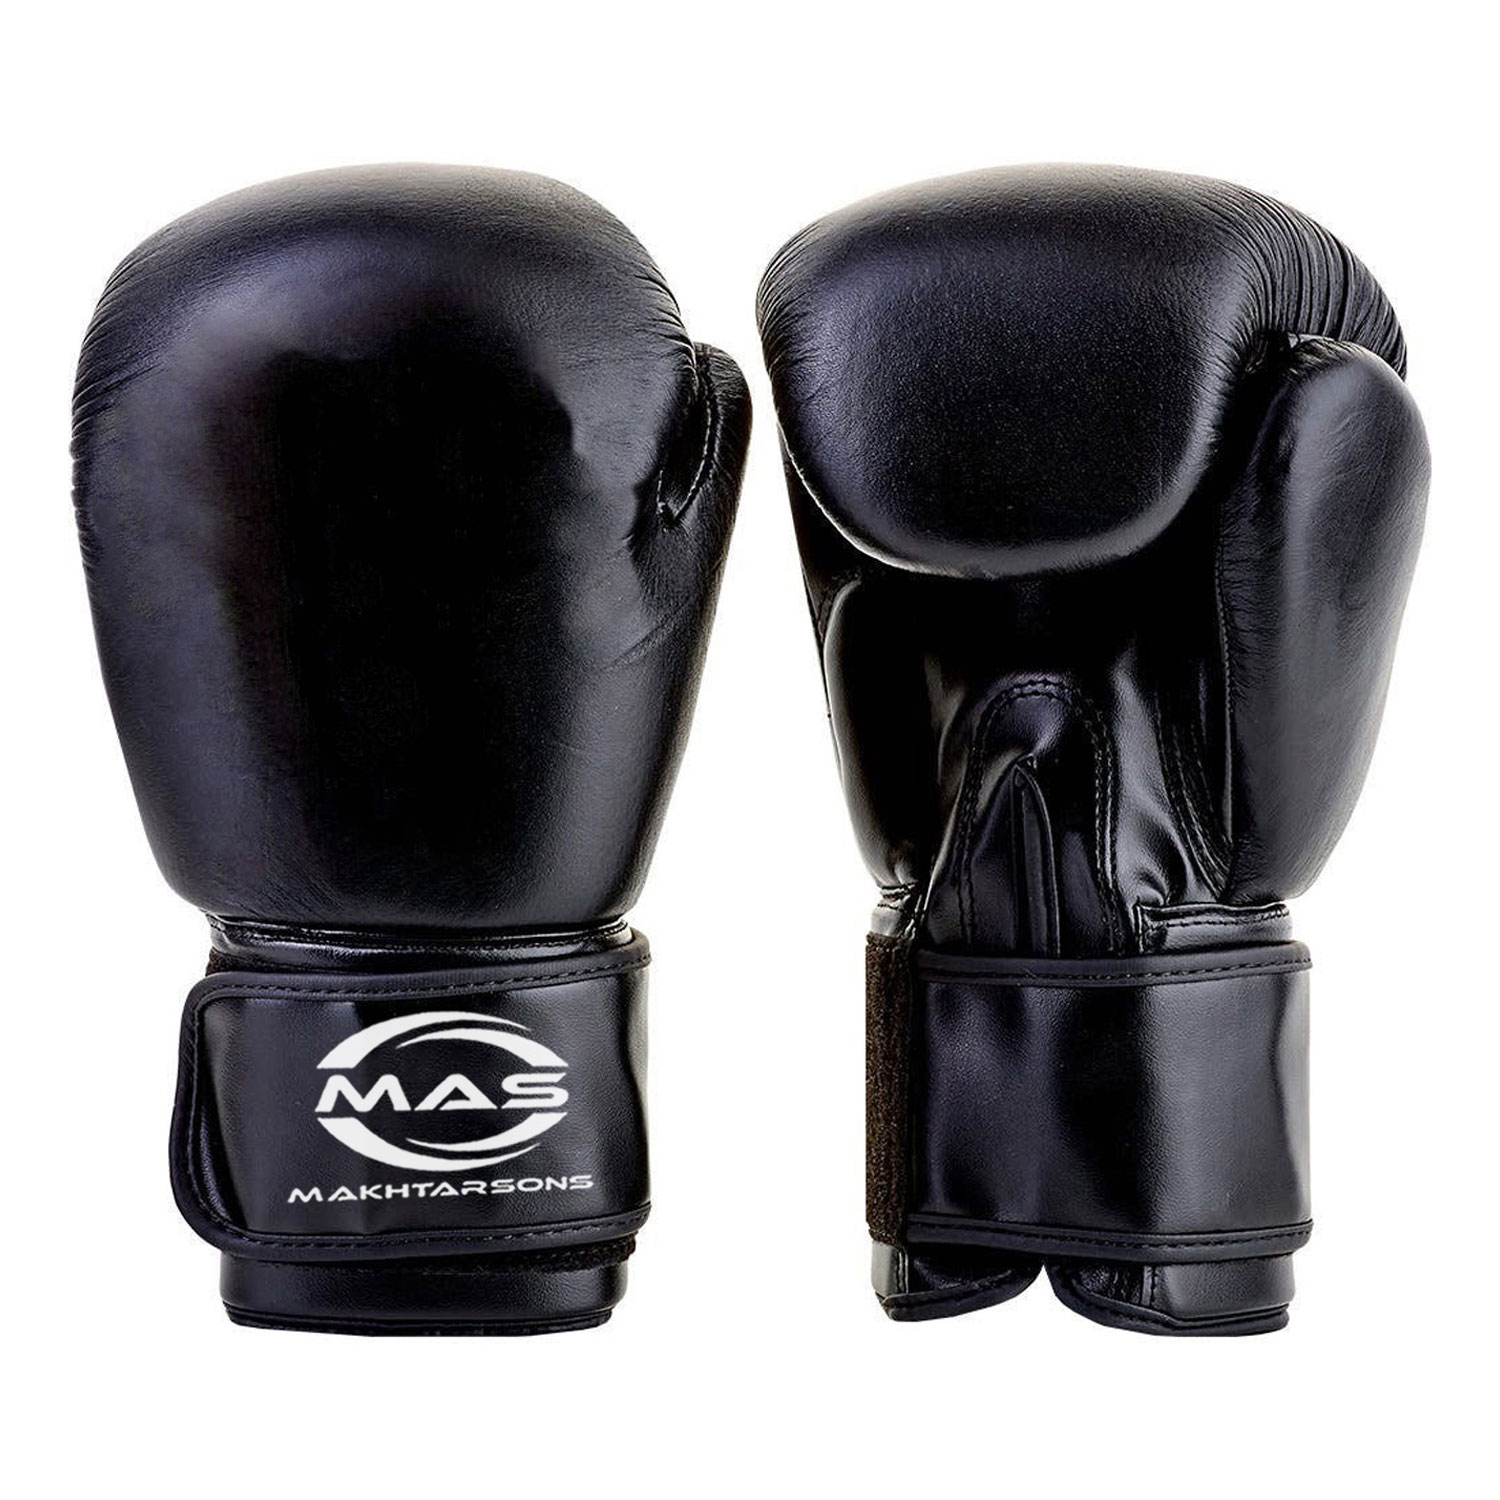 PROFESSIONAL BOXING GLOVES | MAS 201